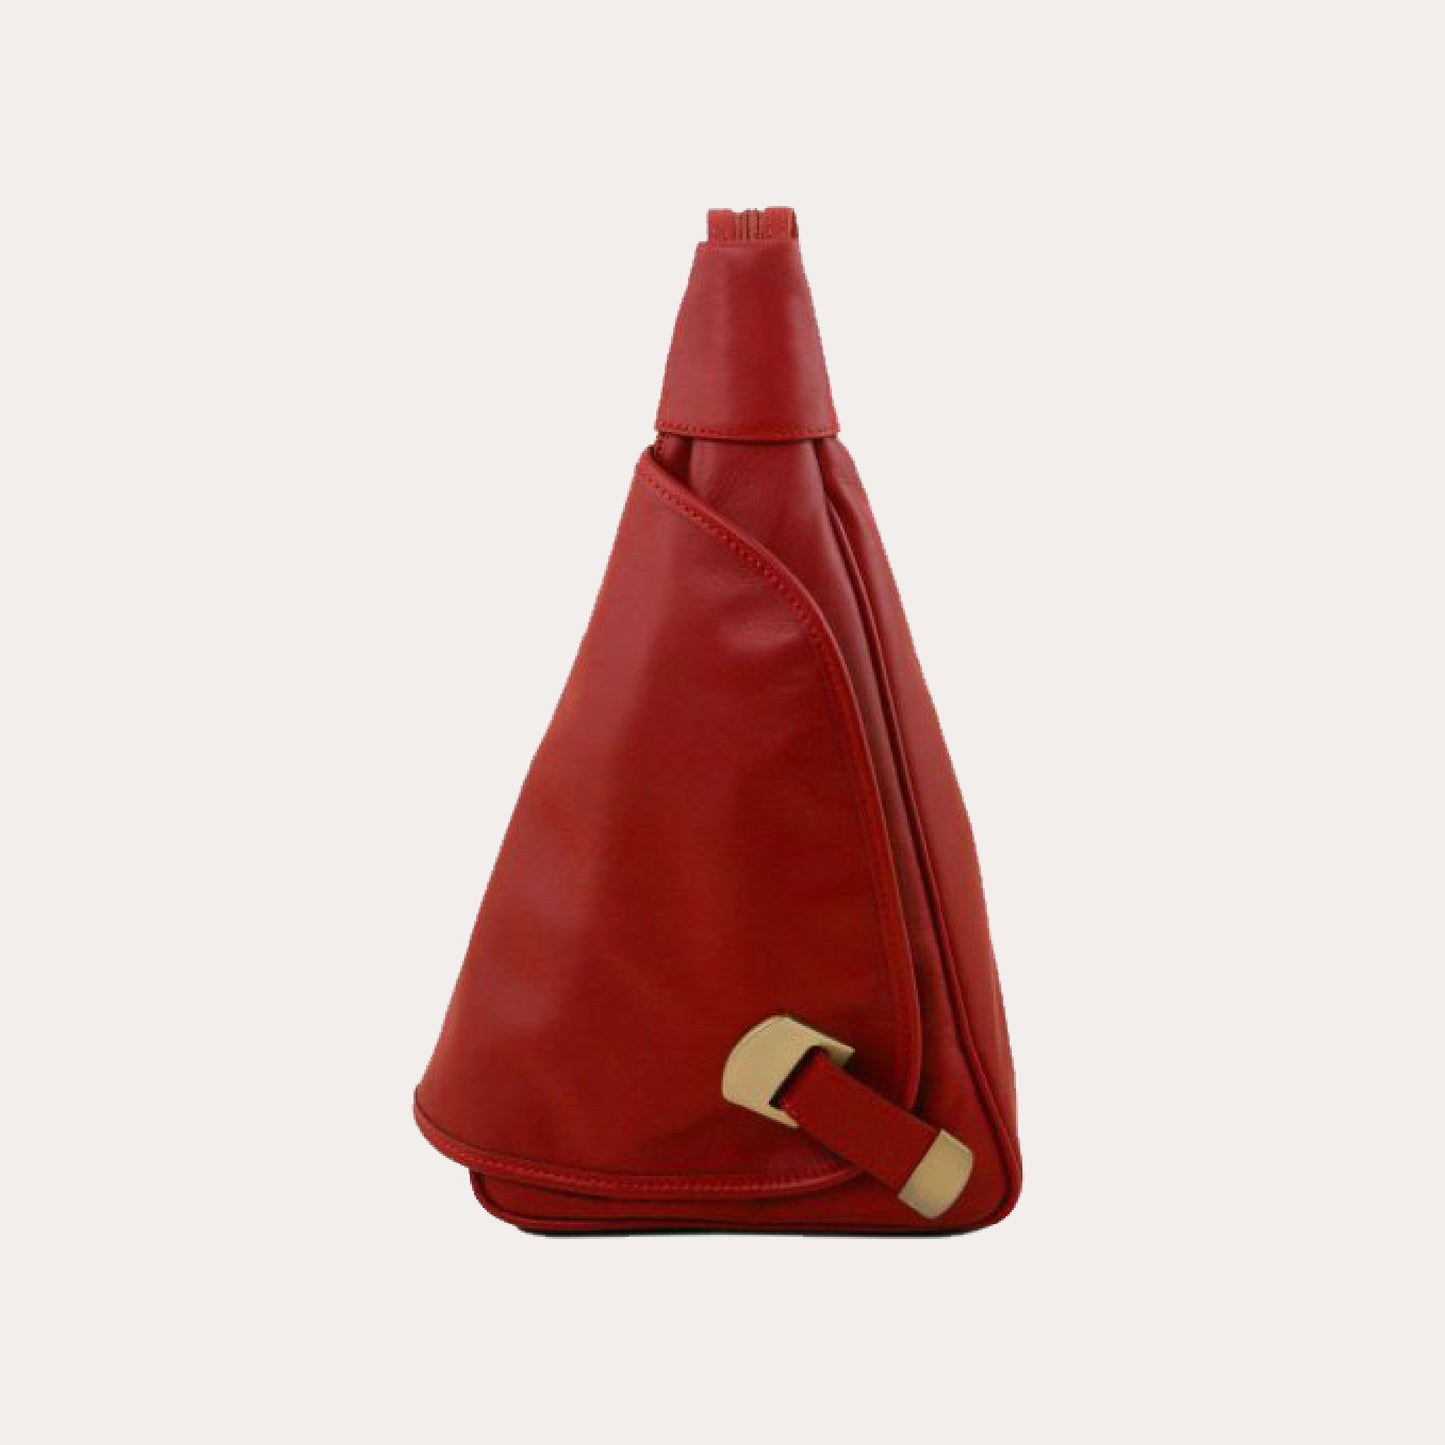 Tuscany Leather Red Leather Backpack